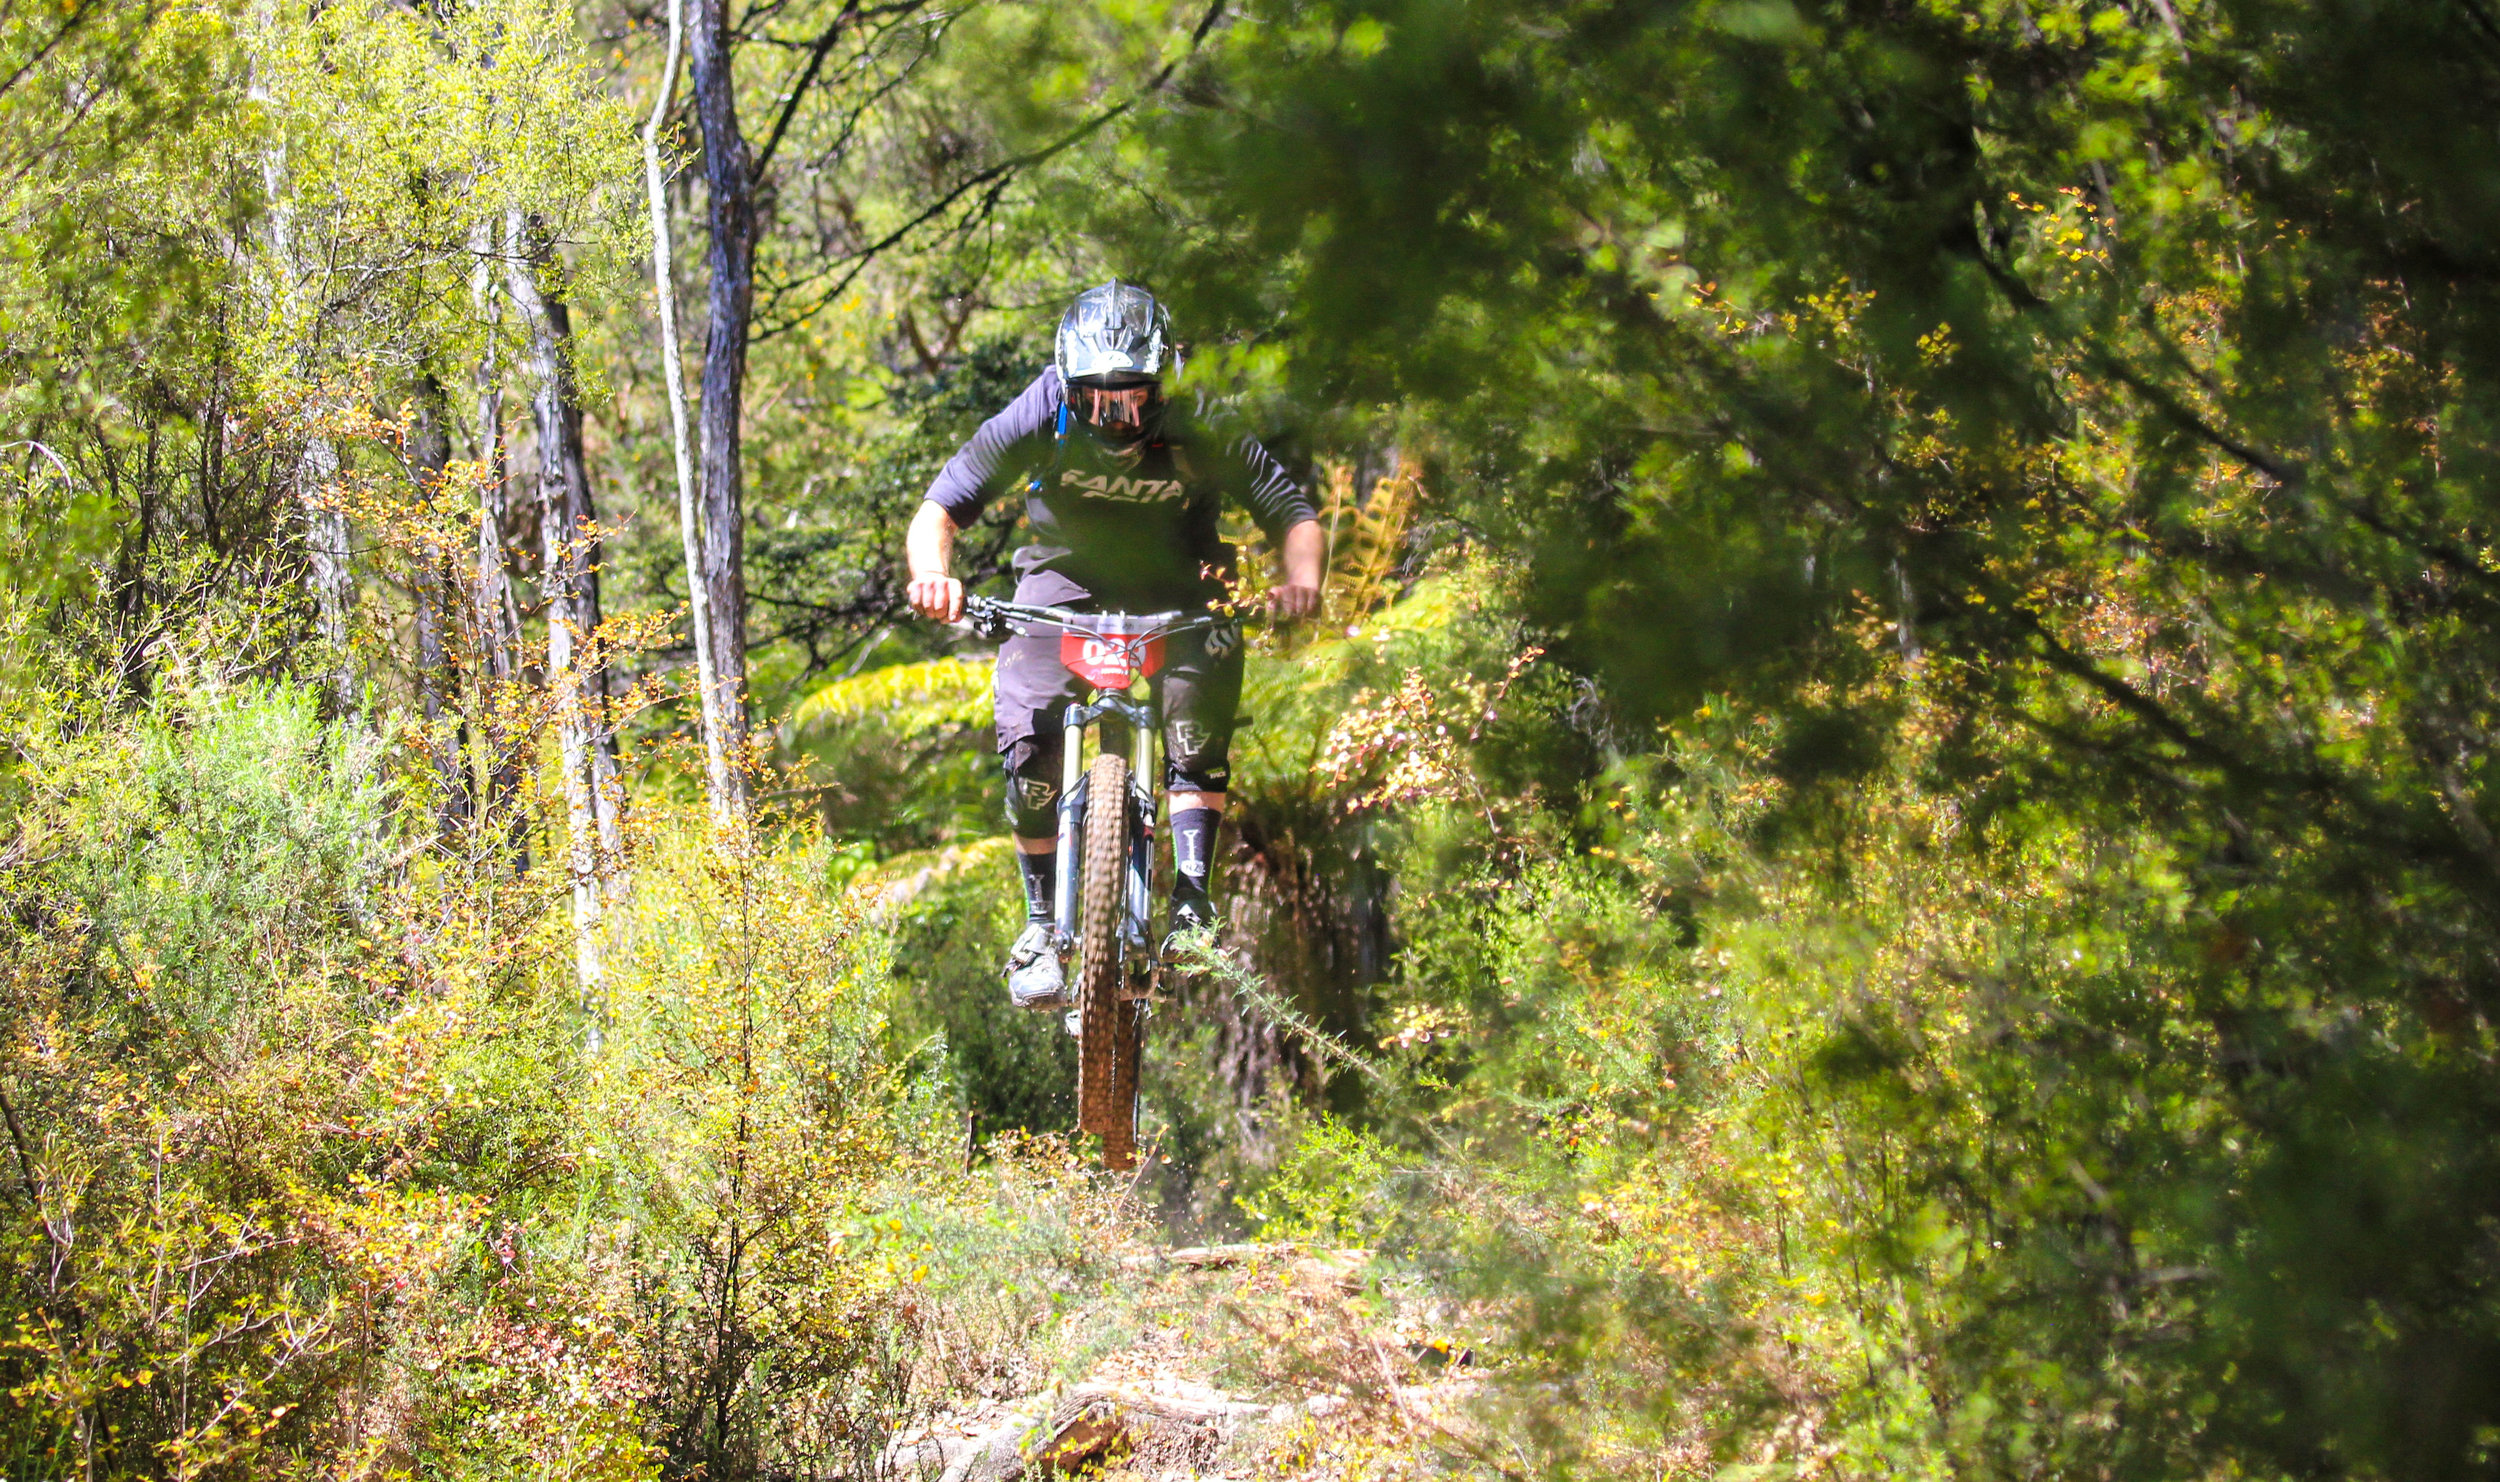 Racers in the Mammoth Enduro show us just how to negotiate those roots!